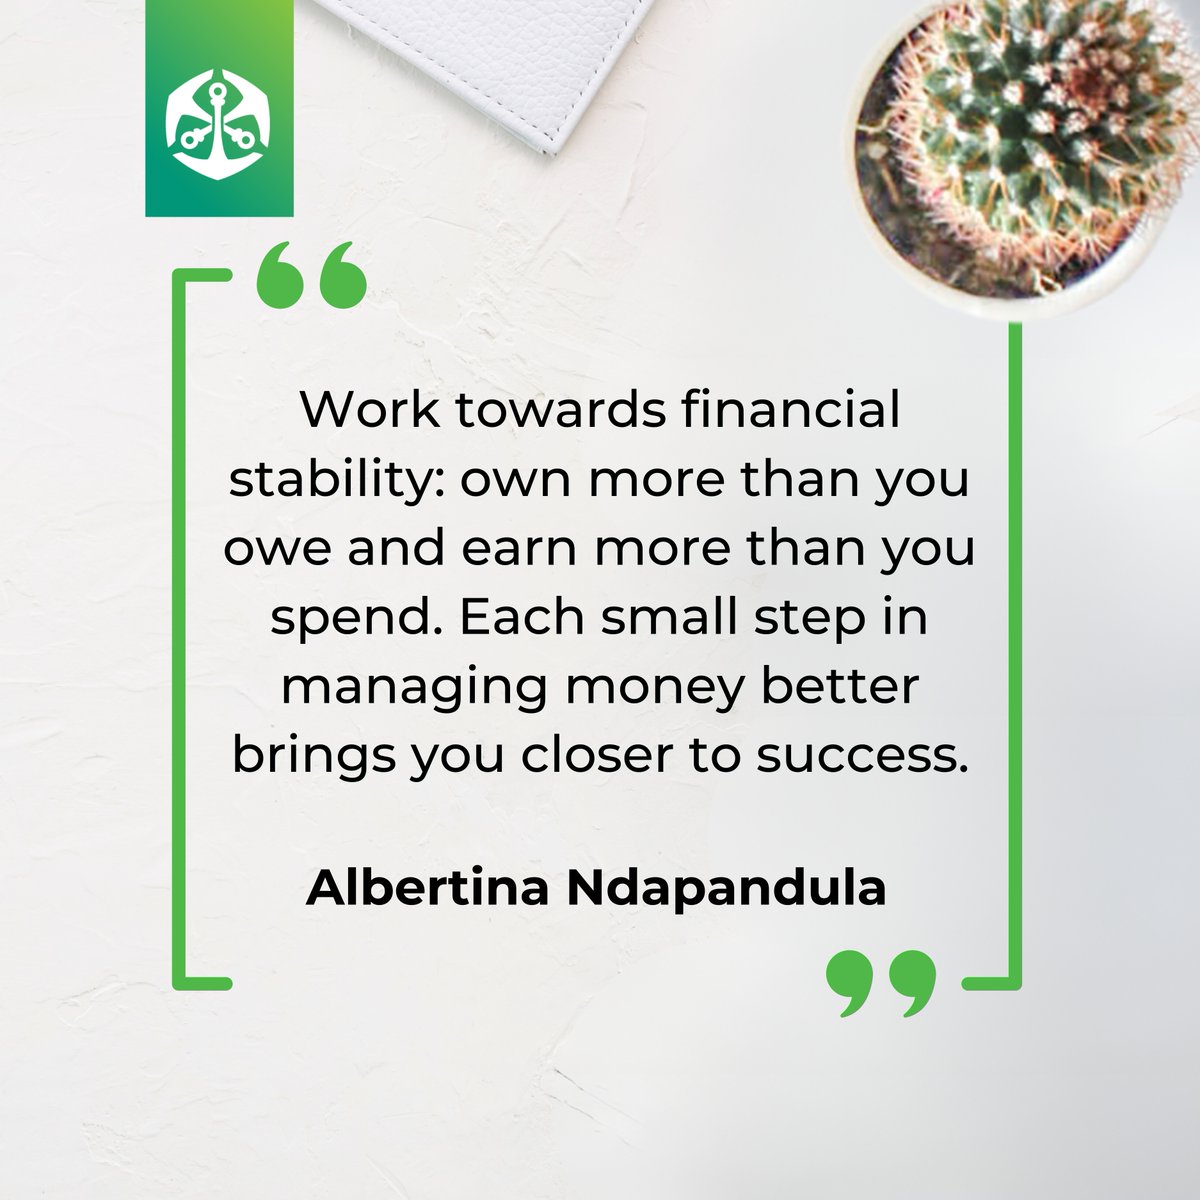 Grateful to Albertina Ndapandula for sharing these invaluable financial insights as part of Old Mutual Namibia's Wednesday Financial Insights. Here's to building a brighter financial future, one step at a time. #FinancialWisdom #OldMutualNamibia #WednesdayInsights